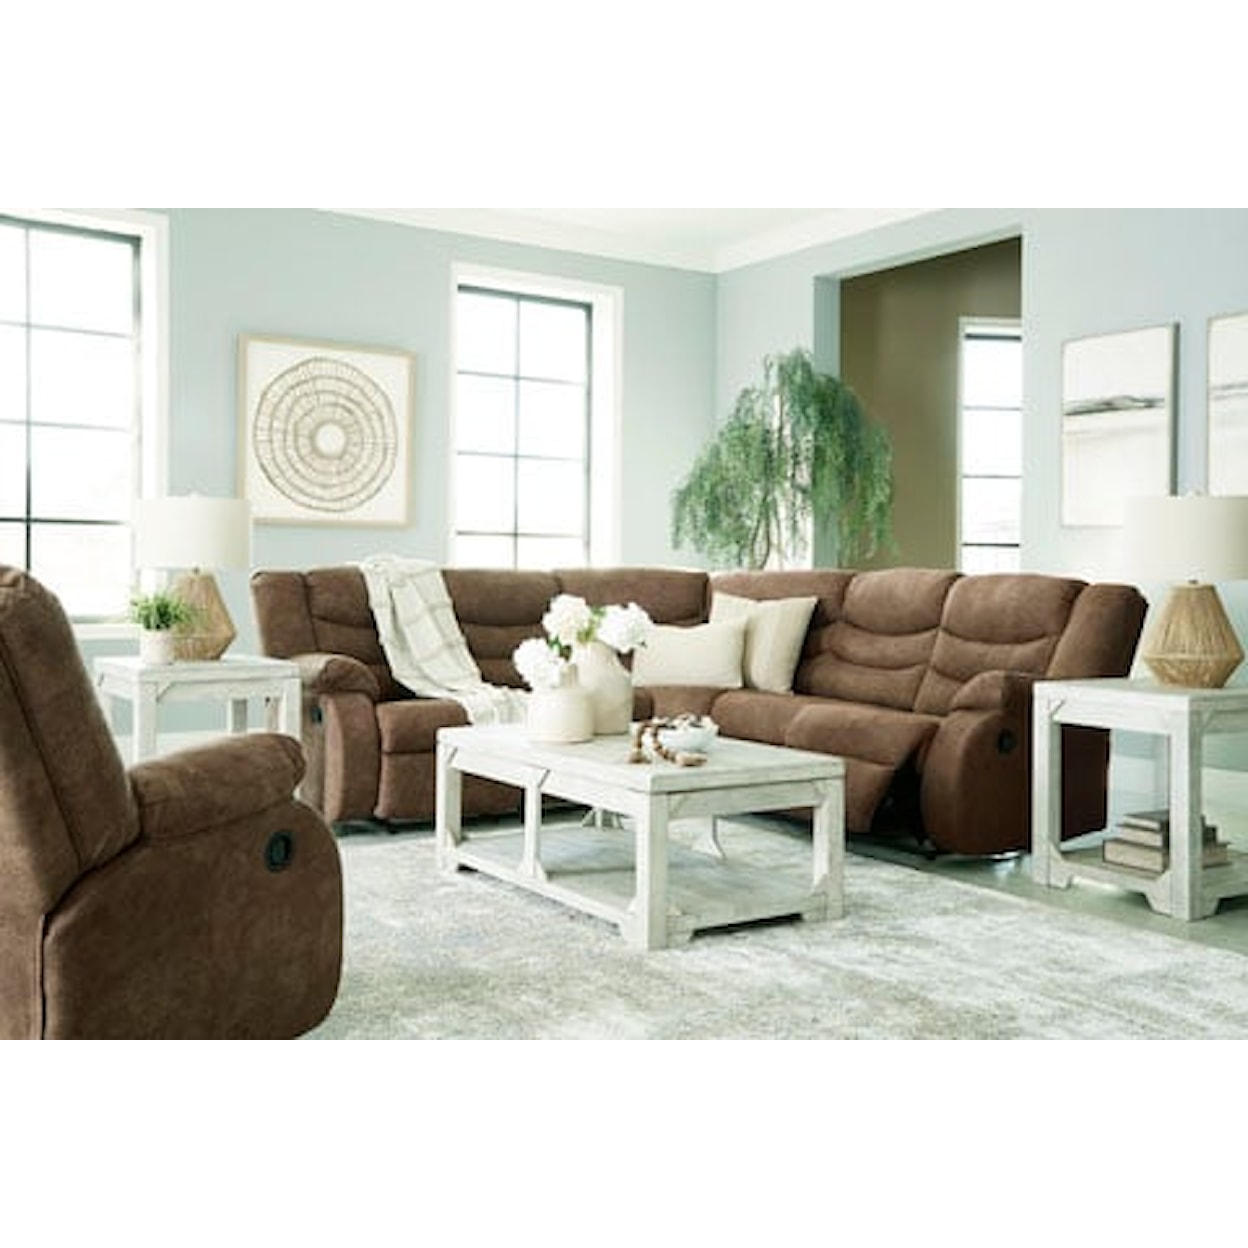 Signature Design by Ashley Partymate Living Room Set